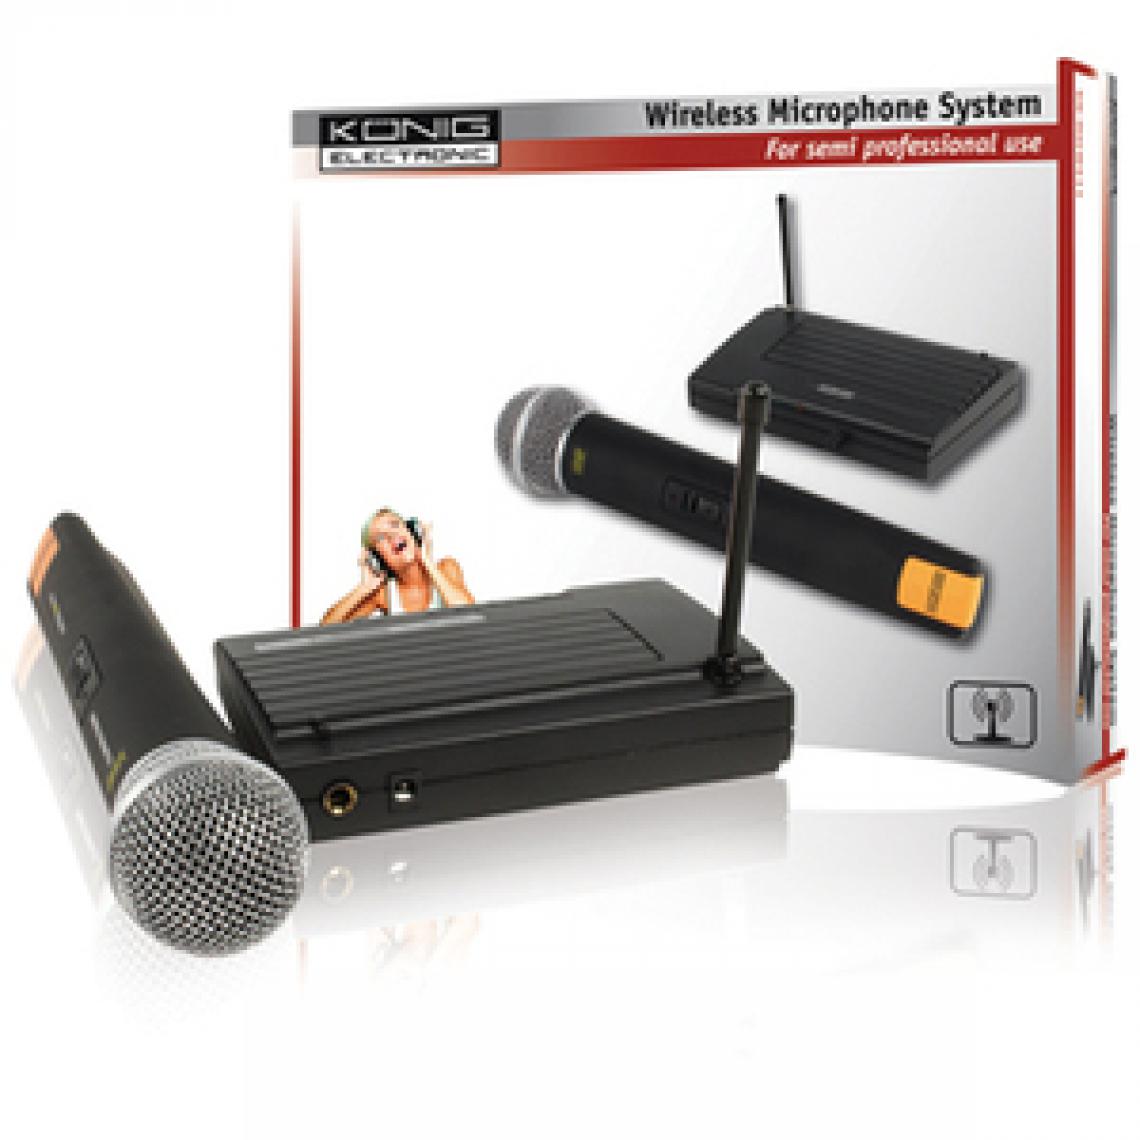 Konig - Wireless Microphone System Solo - Microphone PC